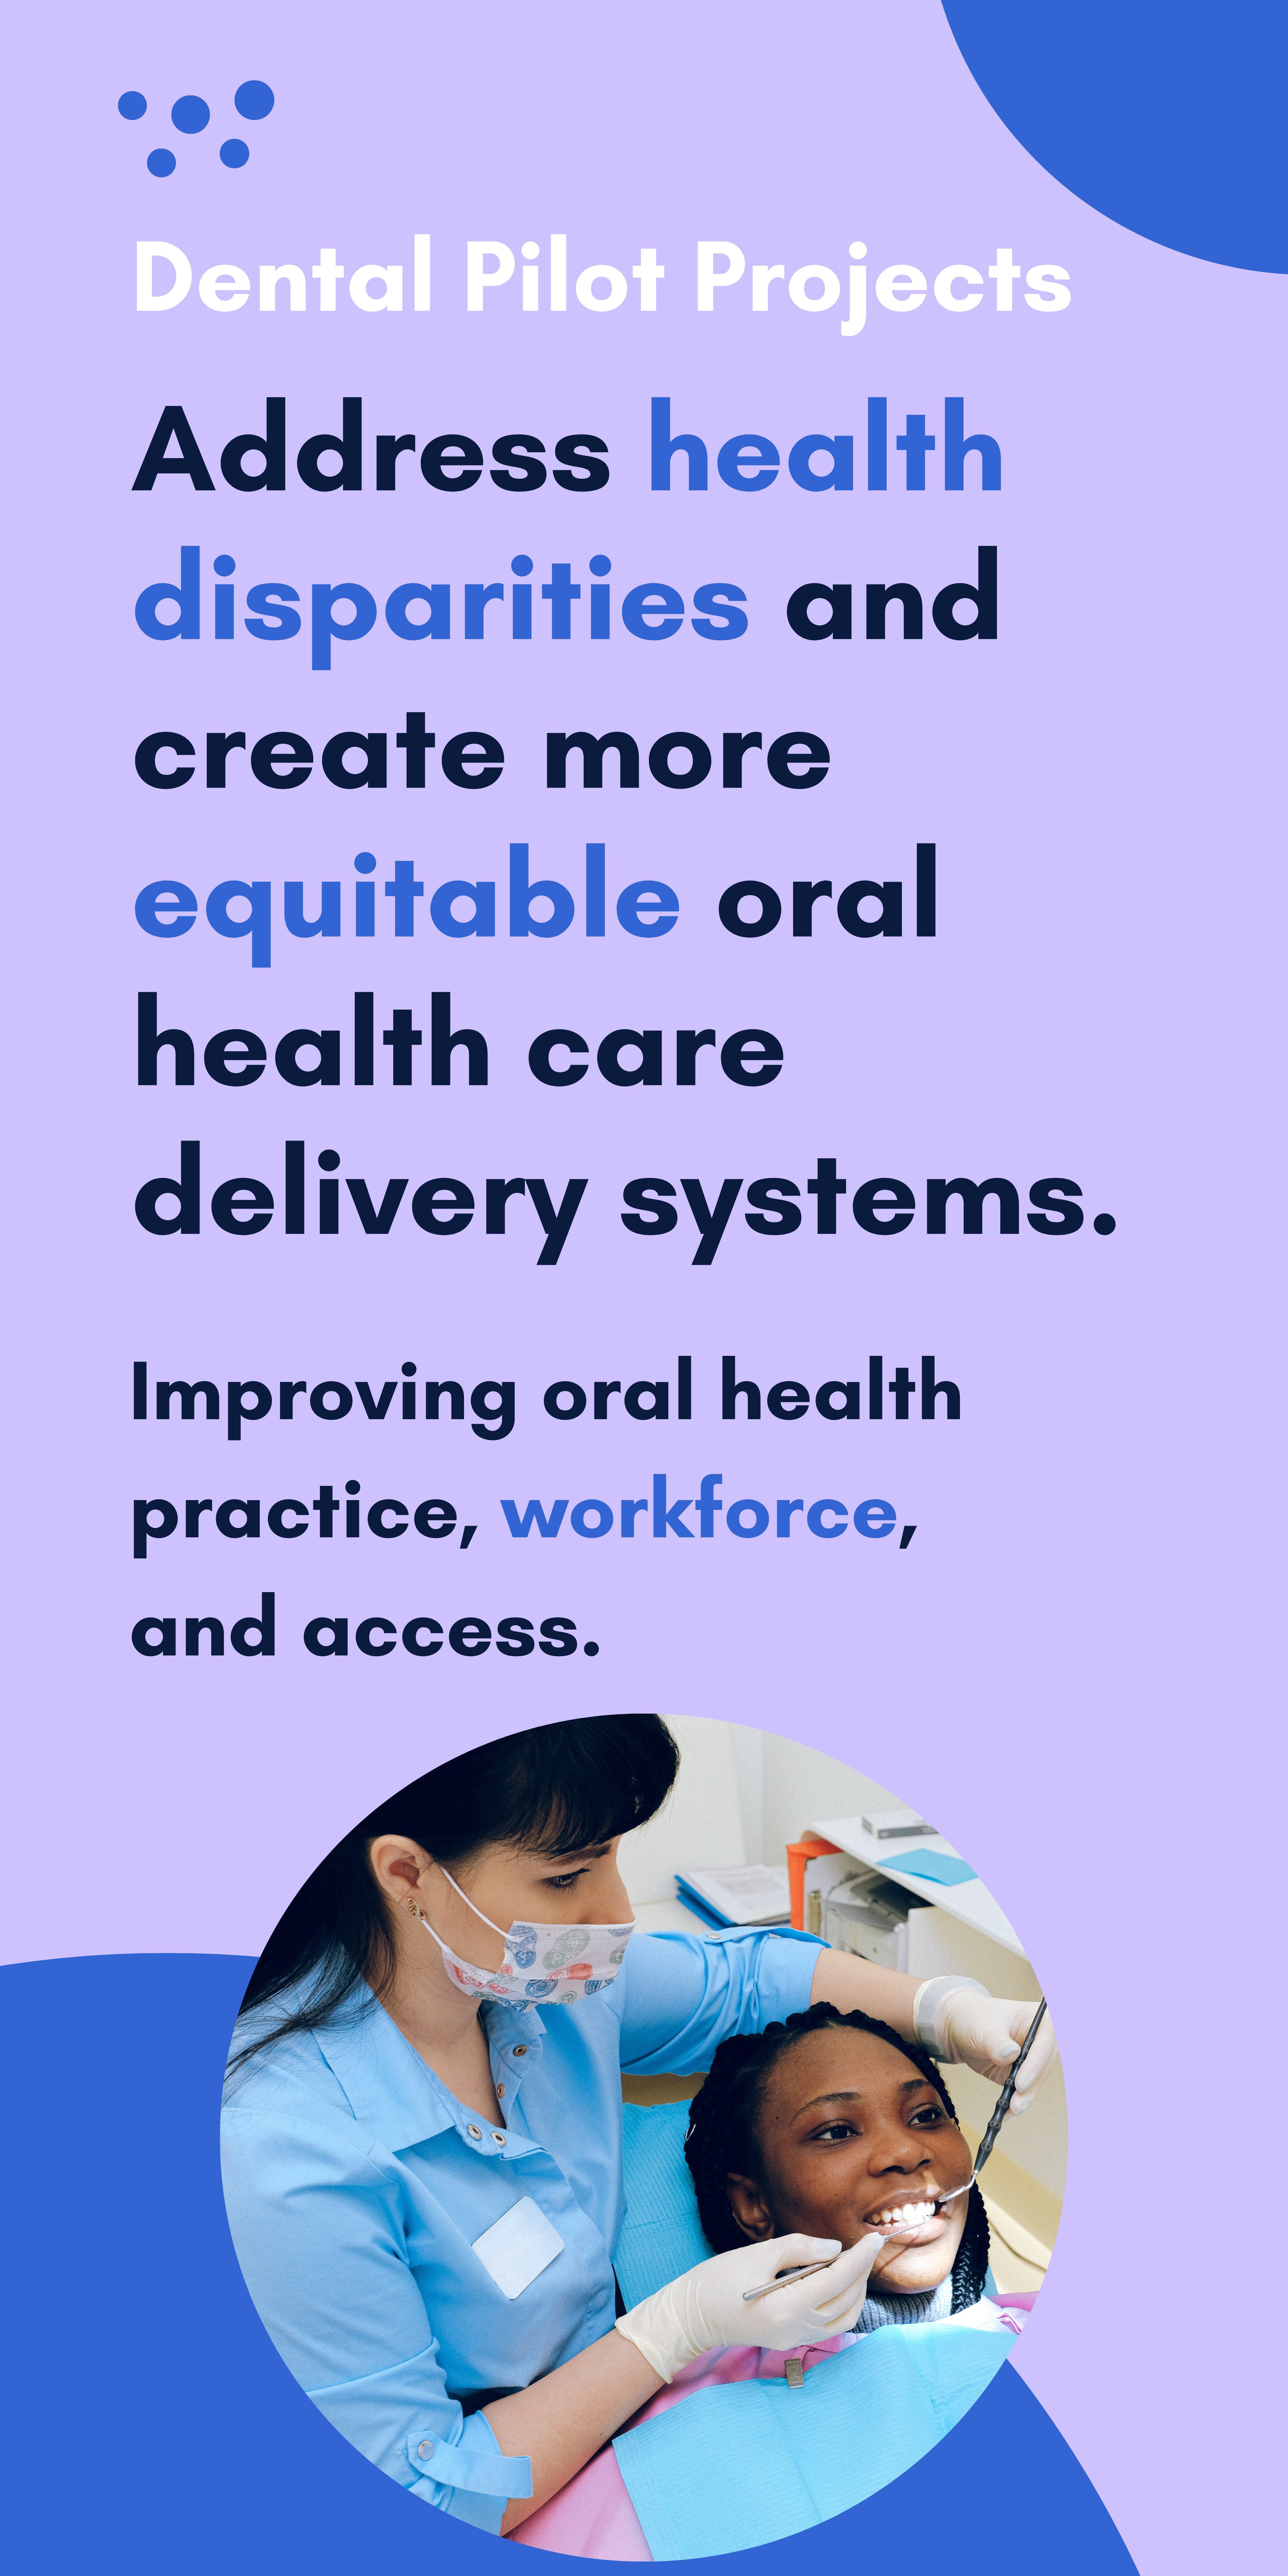 Dental Pilot Projects address health disparities and create more equitable oral health care delivery systems. 